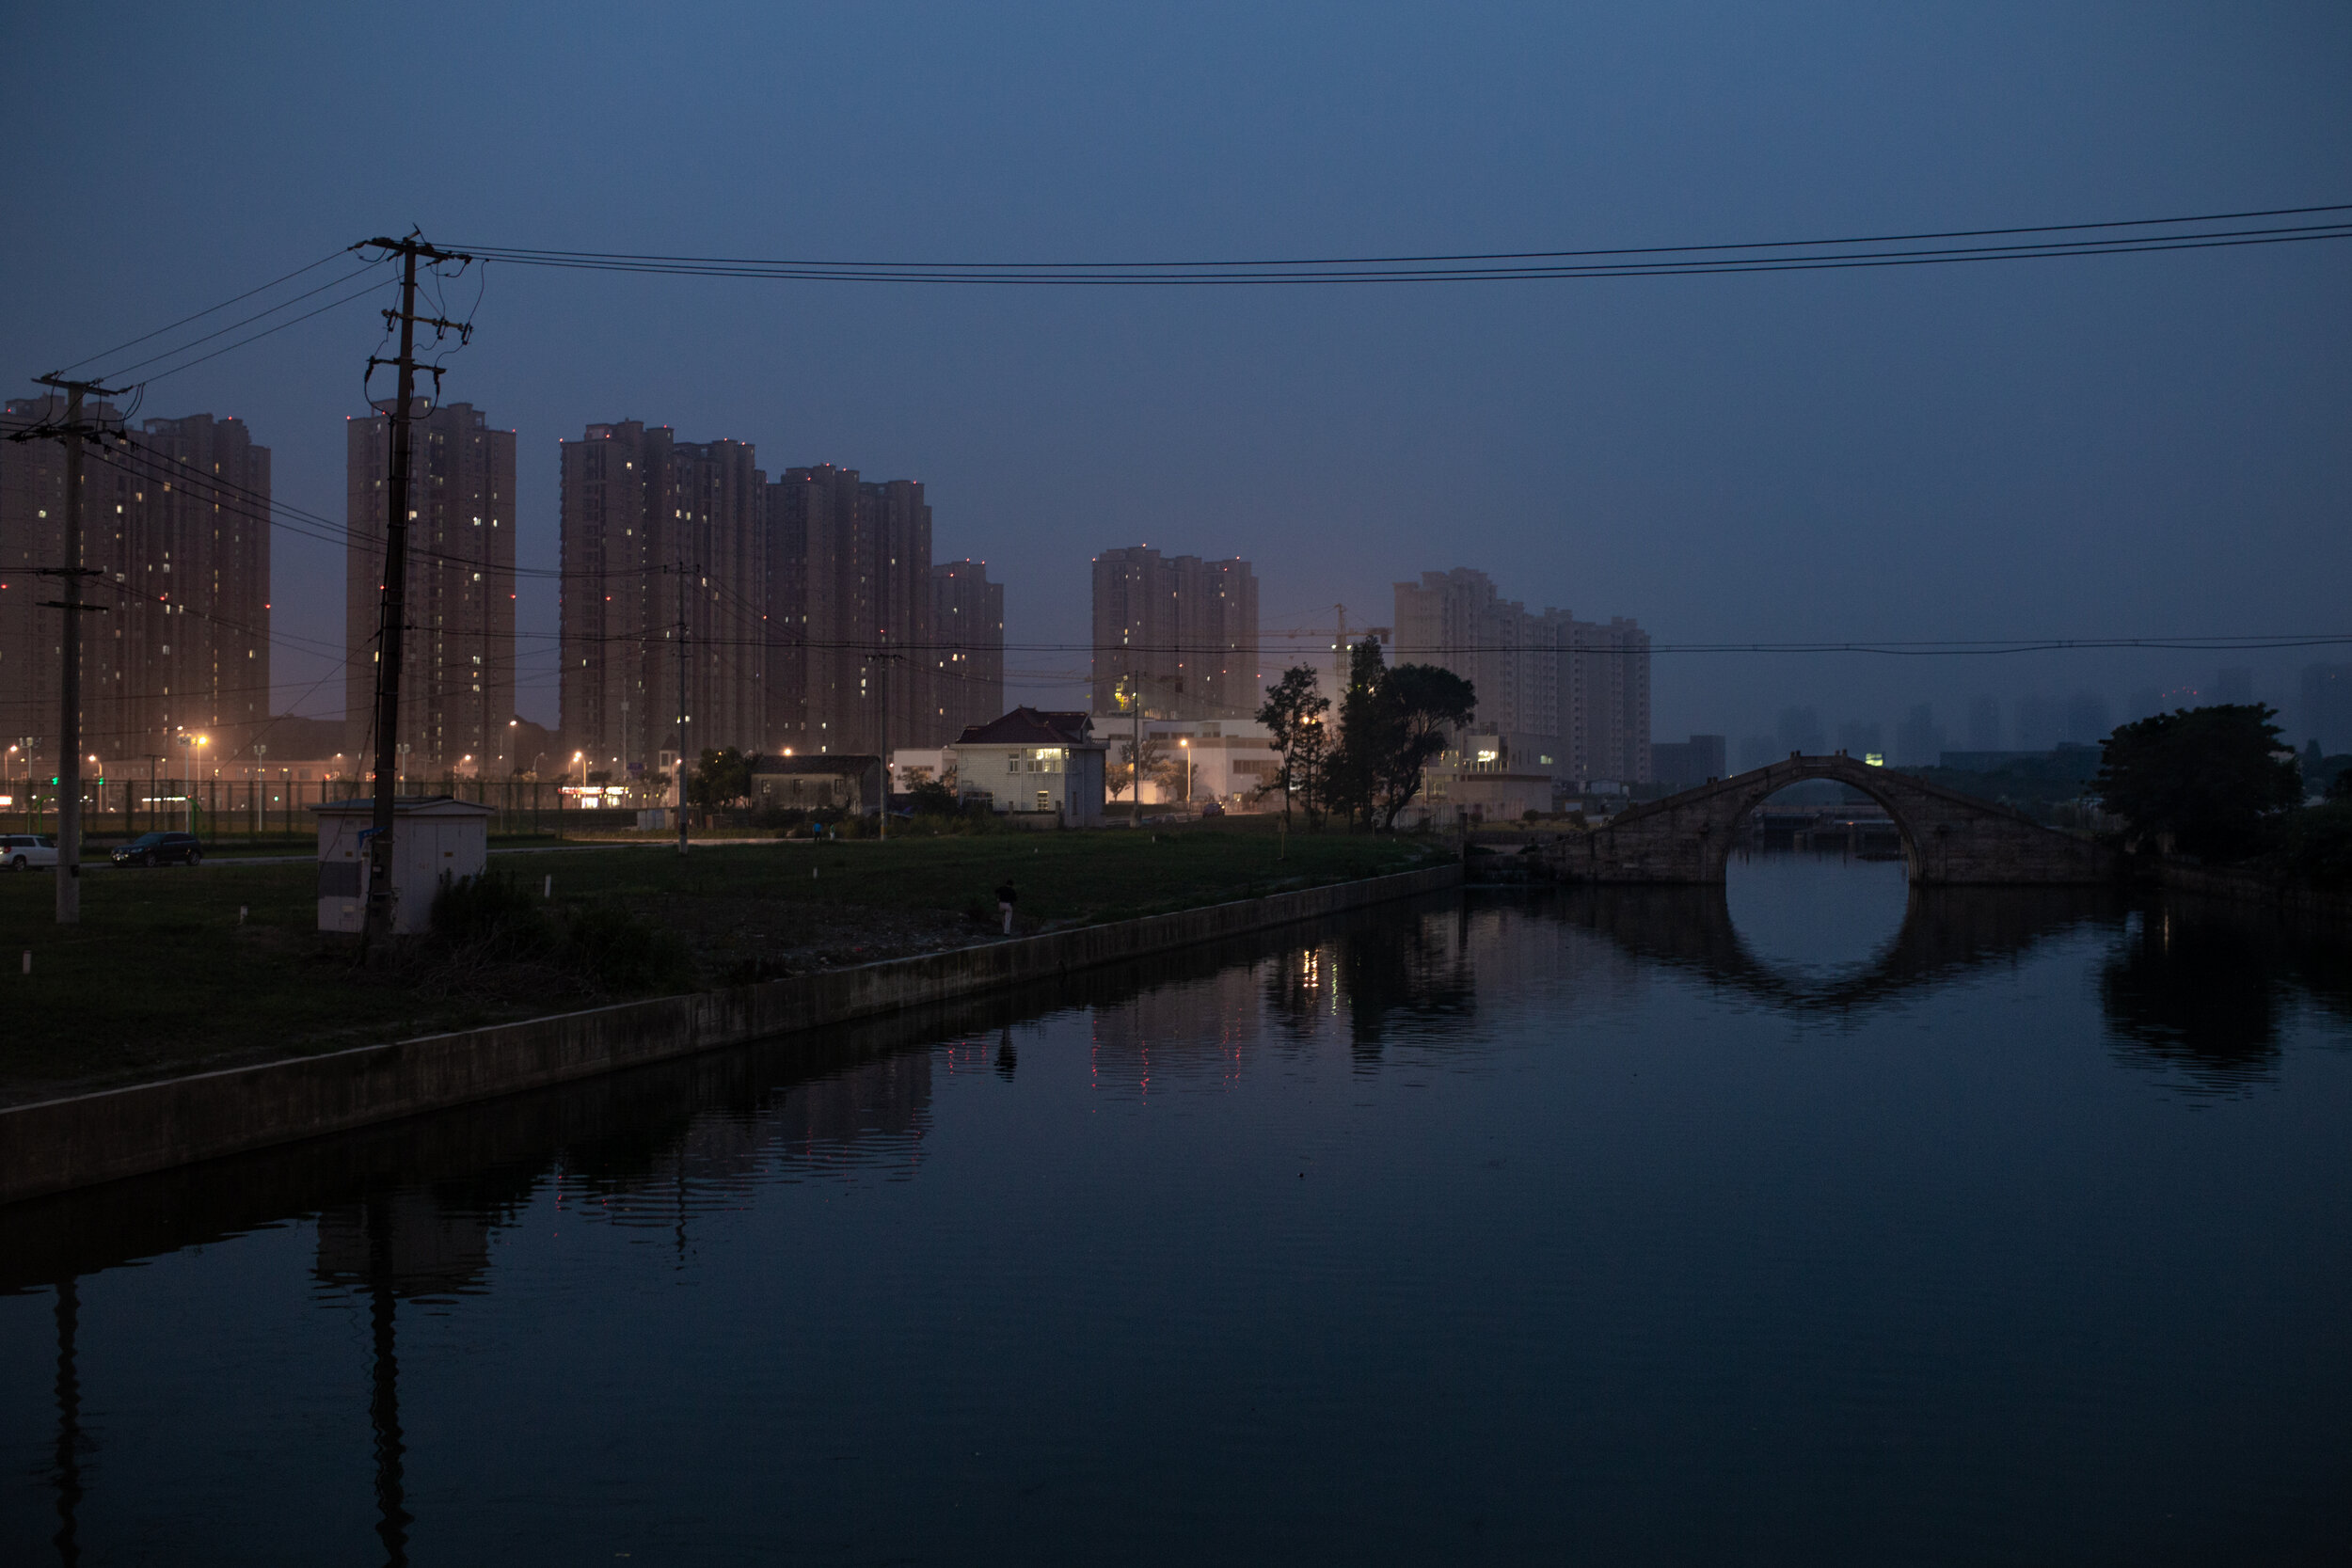  A man goes for an evening stroll in a suburb of Shanghai.  Life in China’s megacities can be very lonely. The apartments are small and the cities massive. Everything is mediated by a cellphone screen. Talking to your friends, ordering food or paying